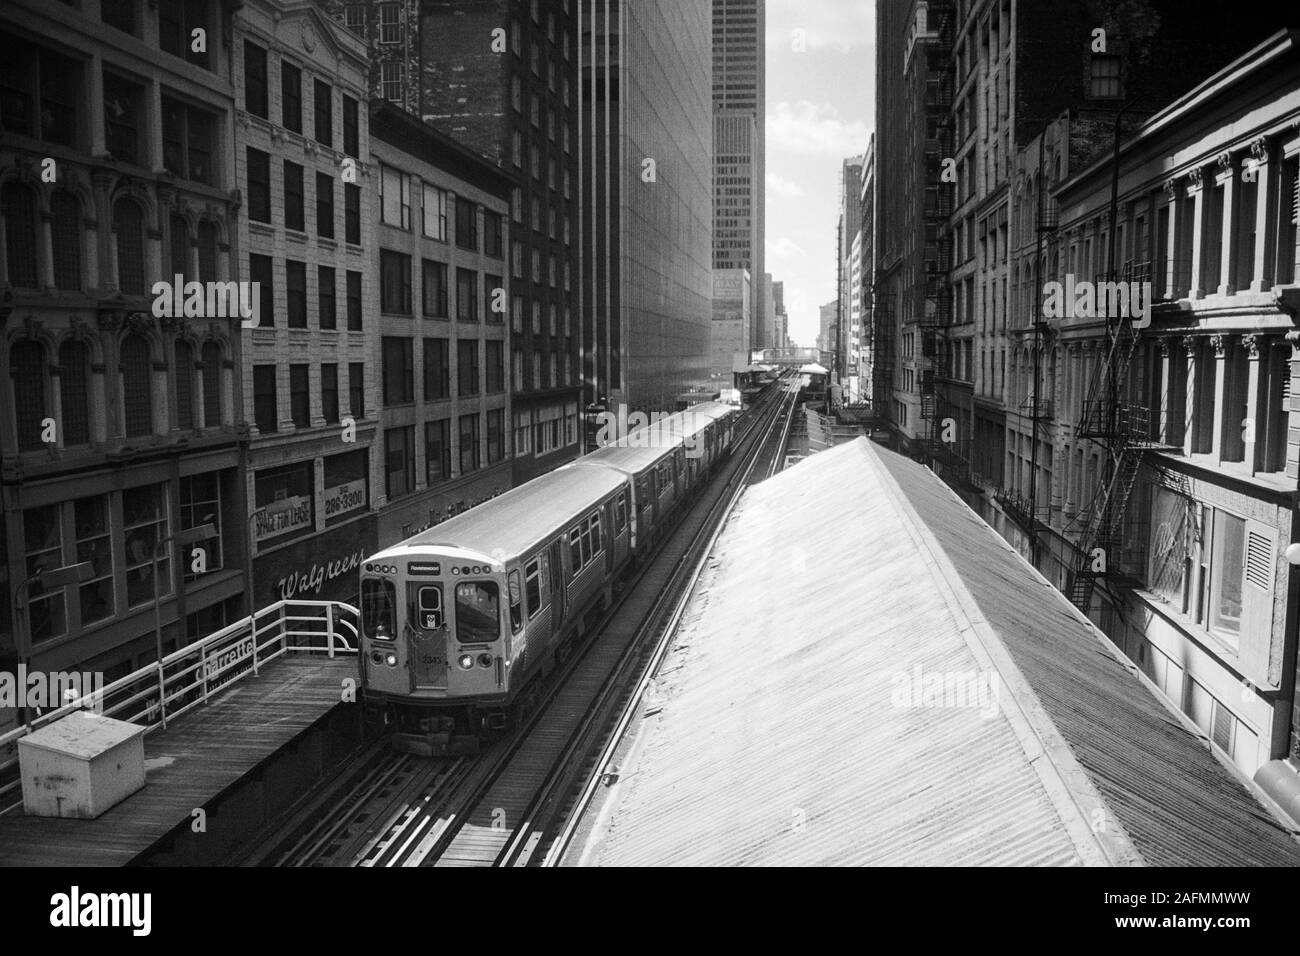 Chicago, Illinois, USA - 1996:  Archival black and white view of downtown architecture and commuter train and elevated tracks along Wabash Ave. Stock Photo